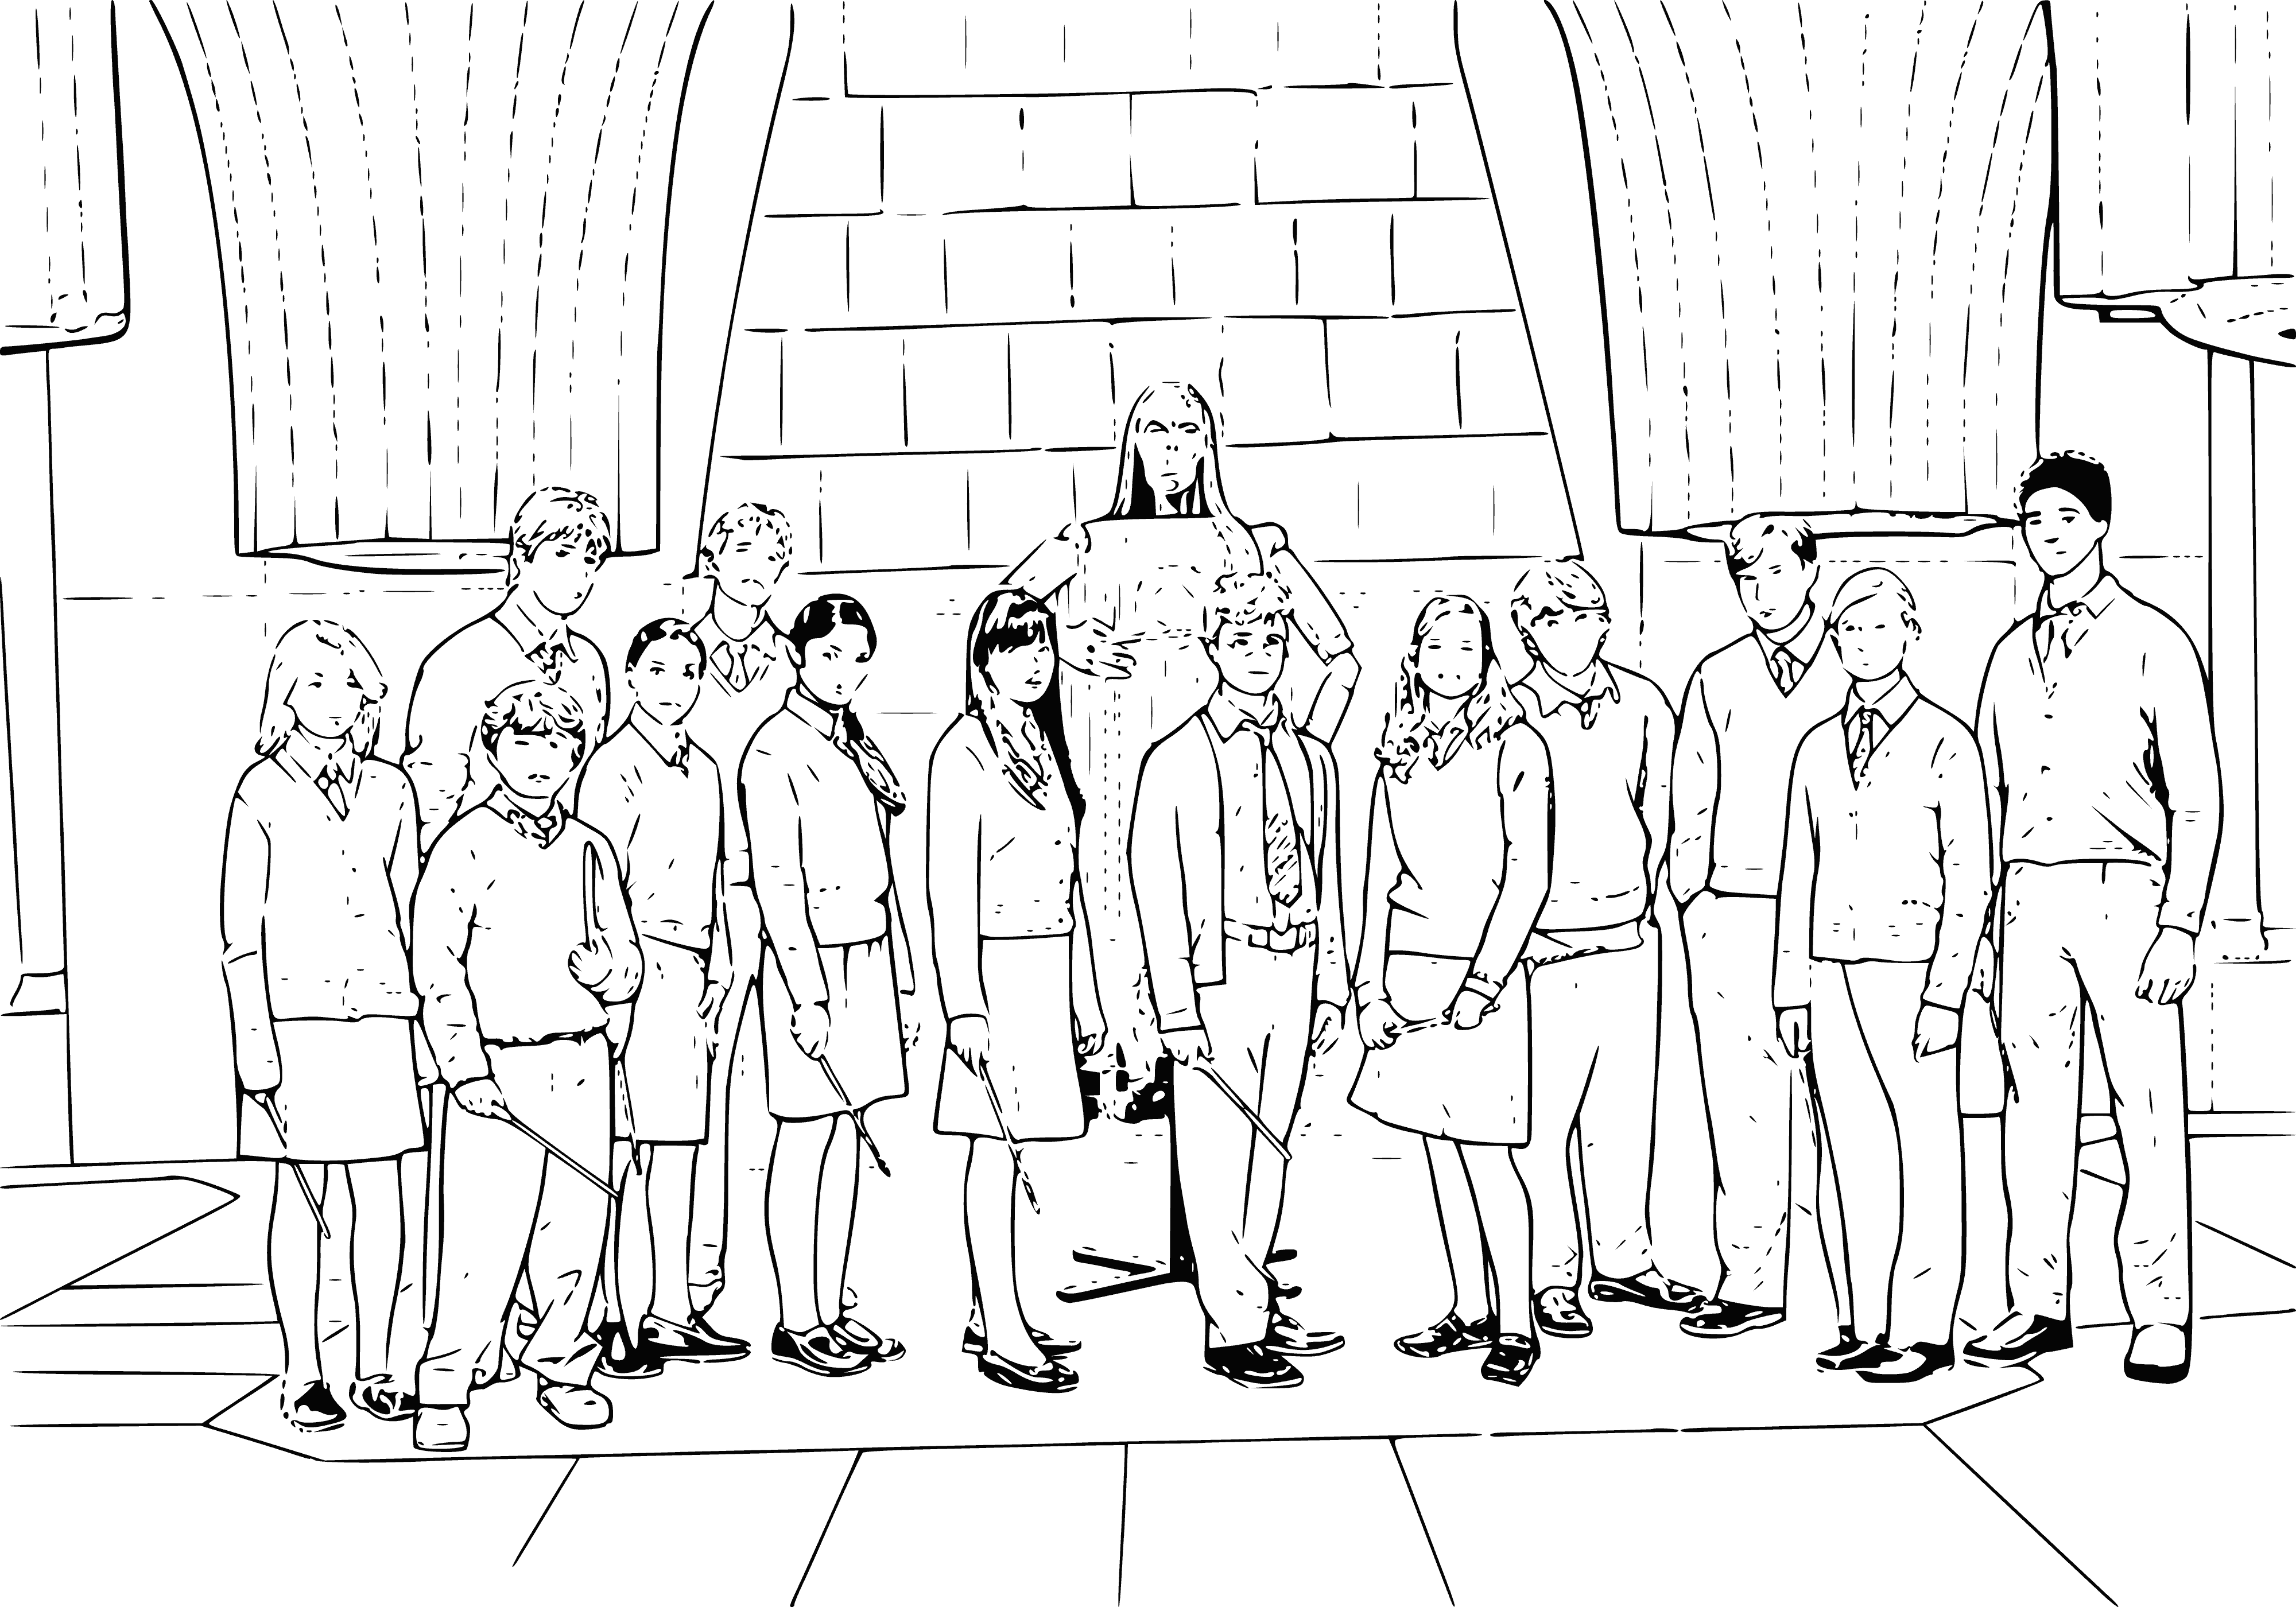 coloring page: Six people wearing colorful robes and scarves gathered together, looking at the camera.